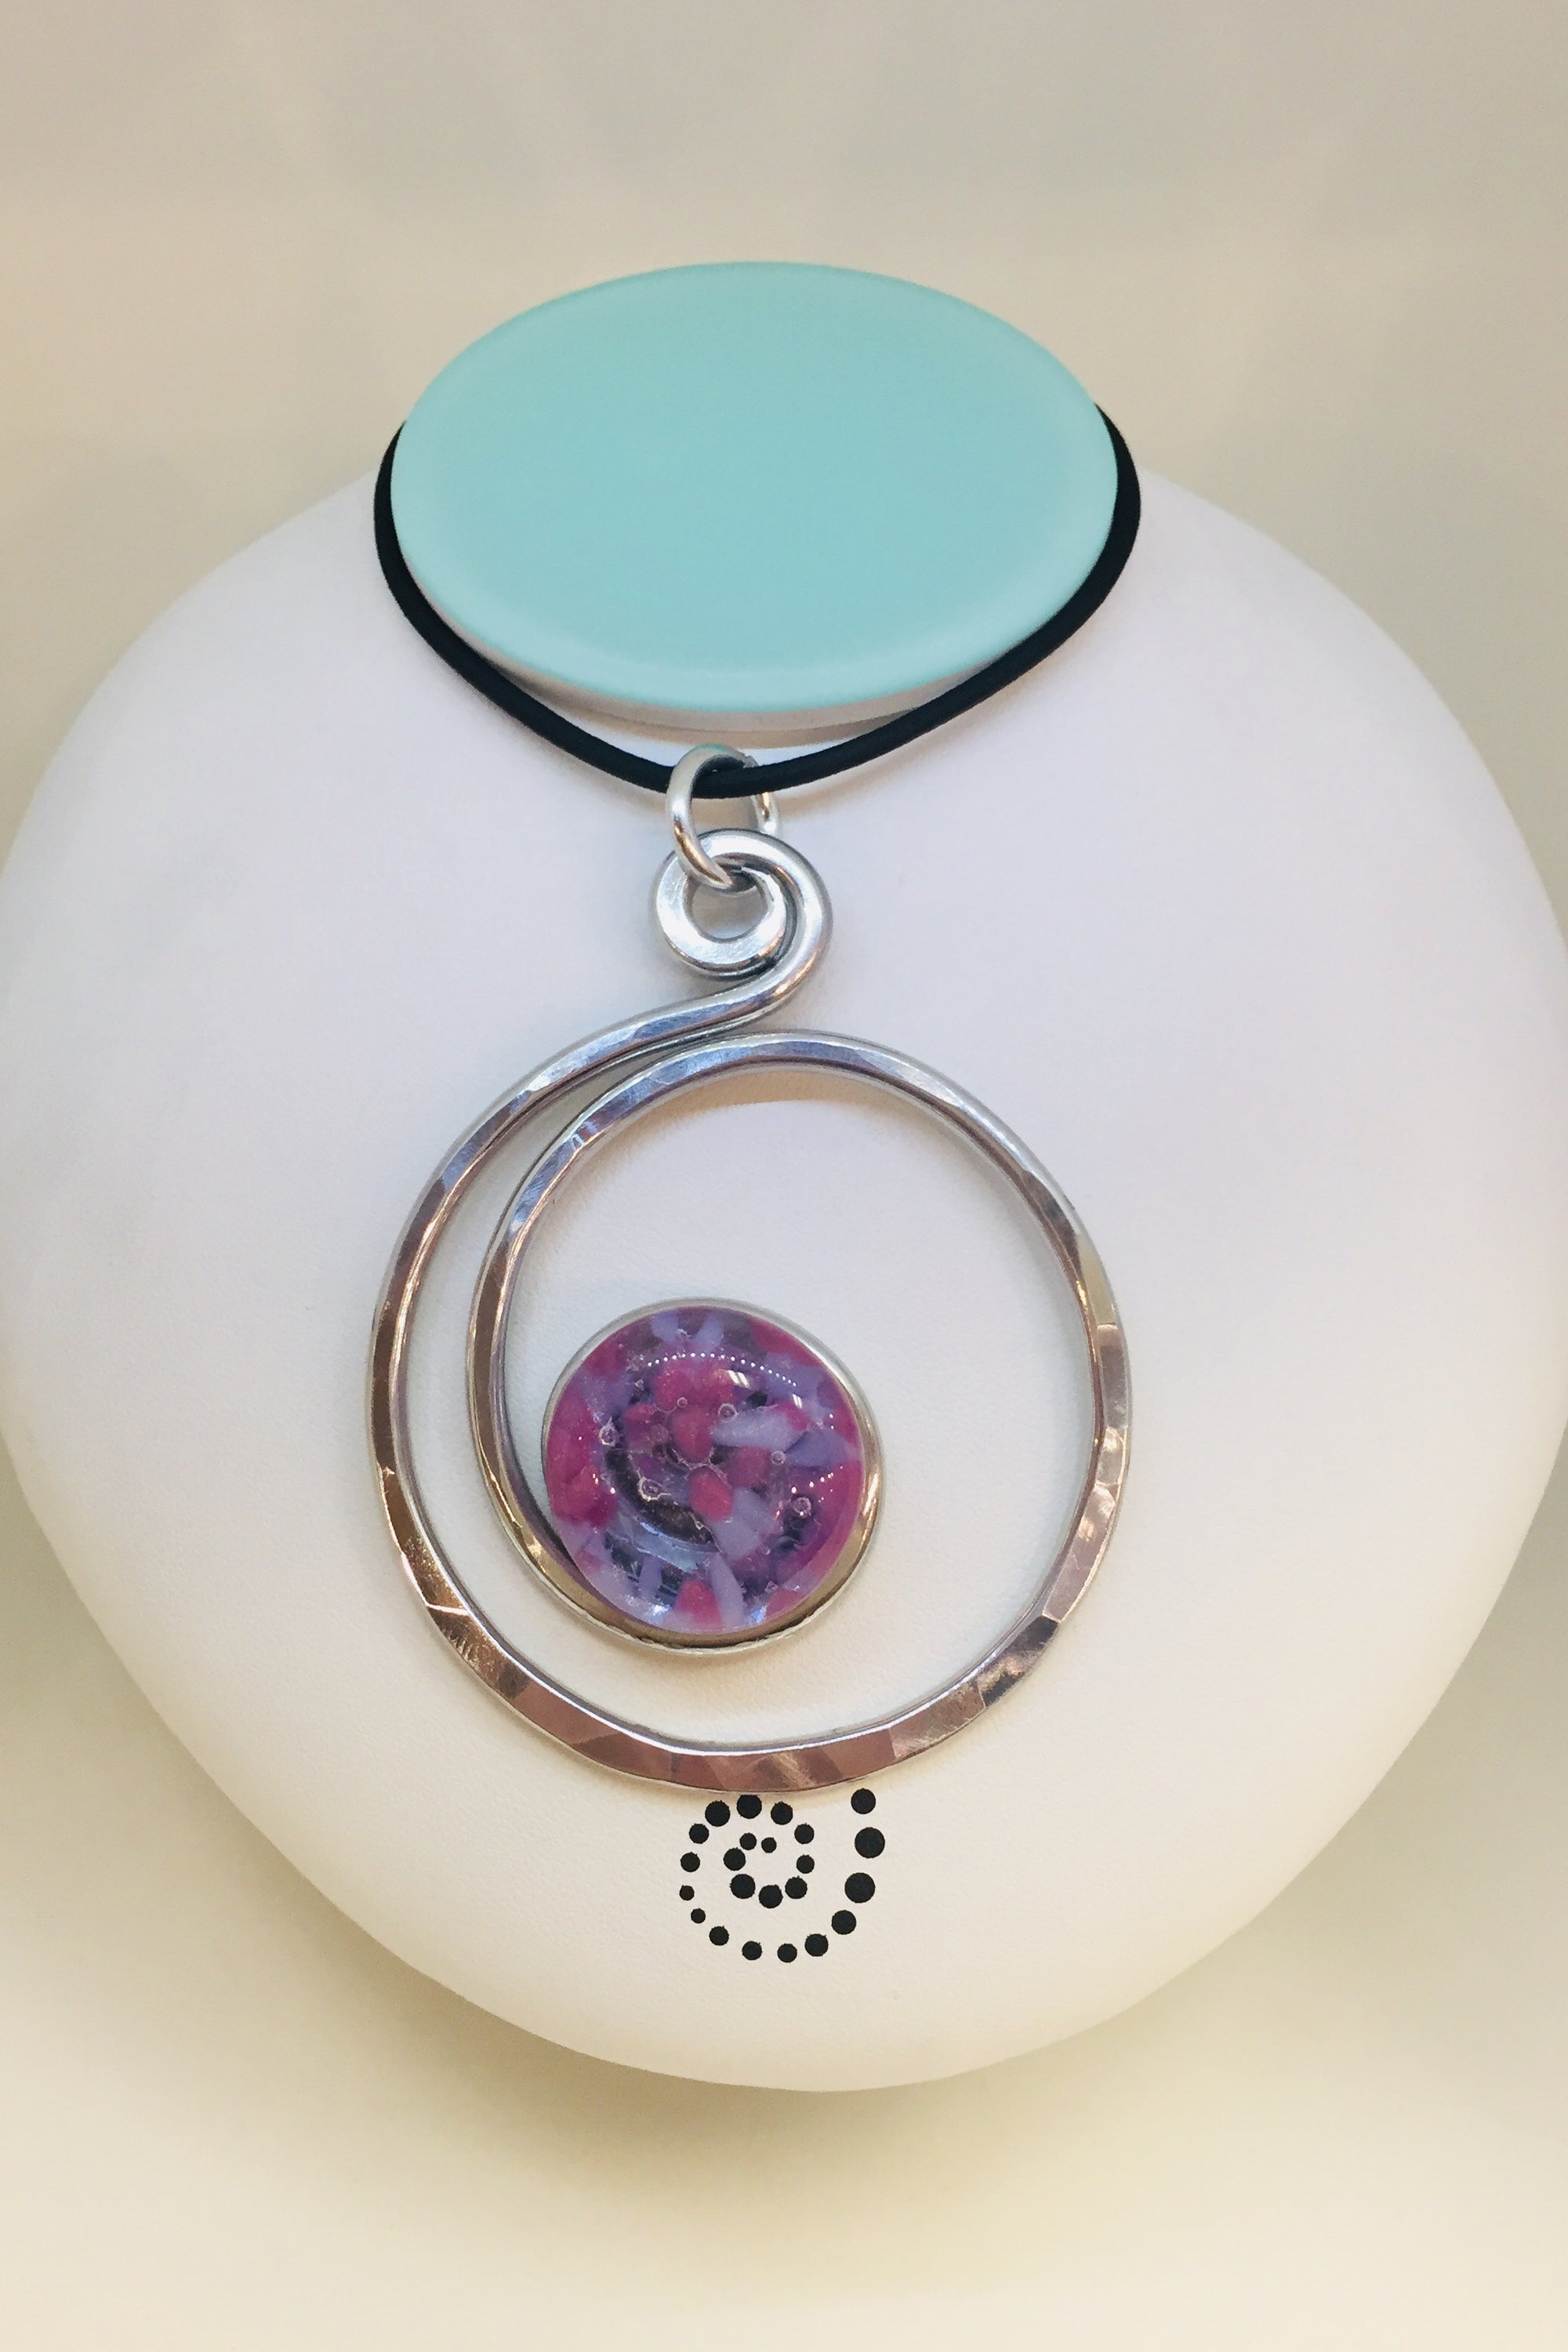 Open Curly Q Necklace with Pink/Periwinkle Stone